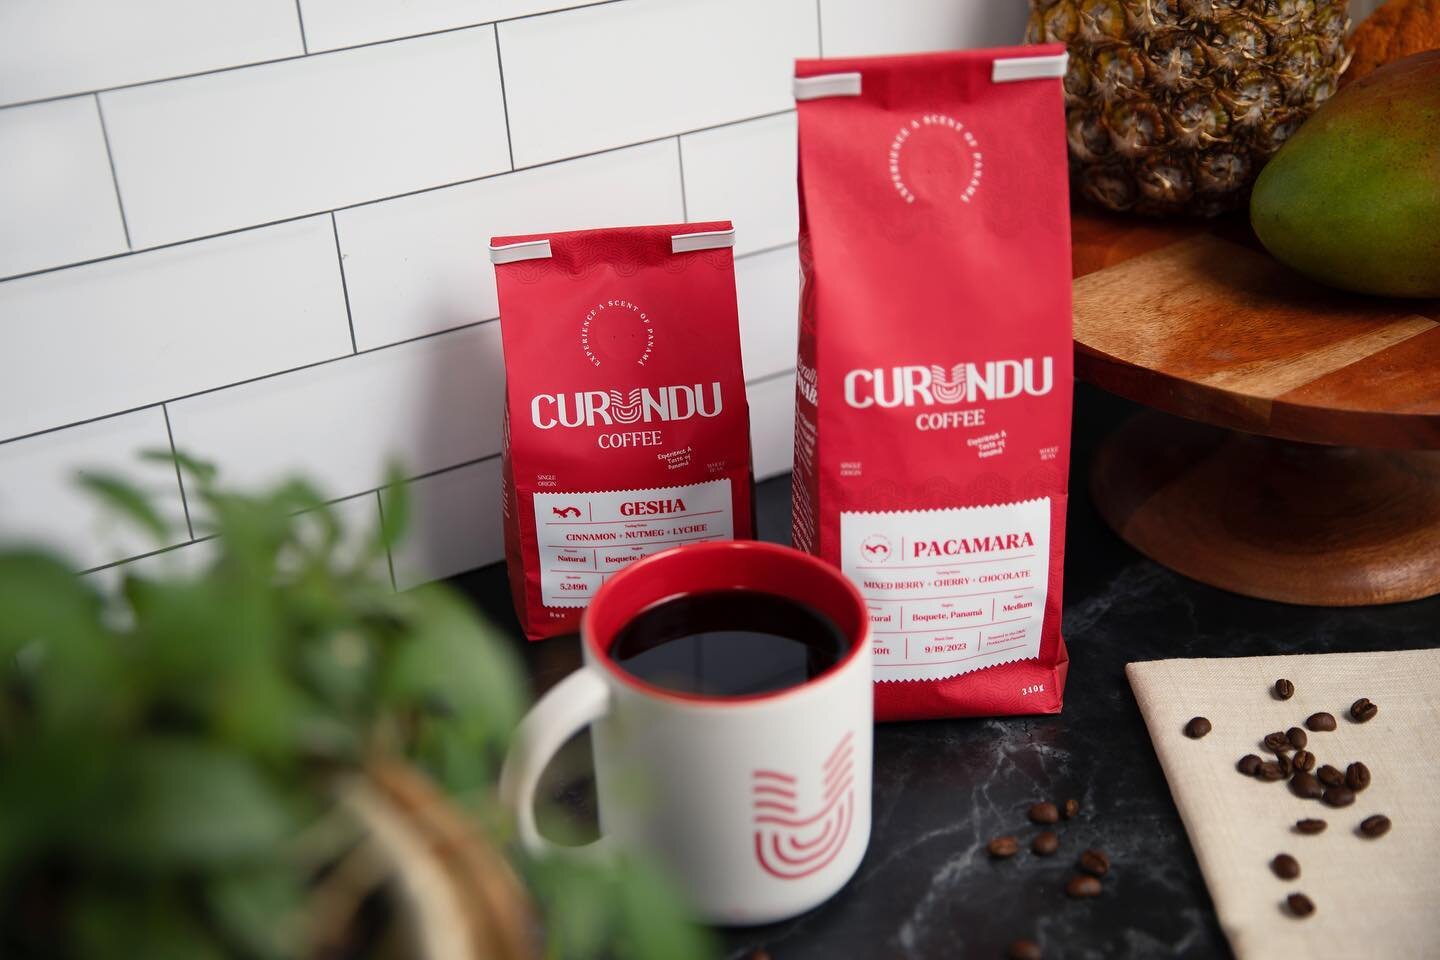 Want coffee that's next level? You can now purchase Curundu Coffee online. Visit curundu.com for the best coffee Panam&aacute; has to offer (direct link in bio). #coffeelovers #panam&aacute; #panamacoffee #geshacoffee #specialtycoffee